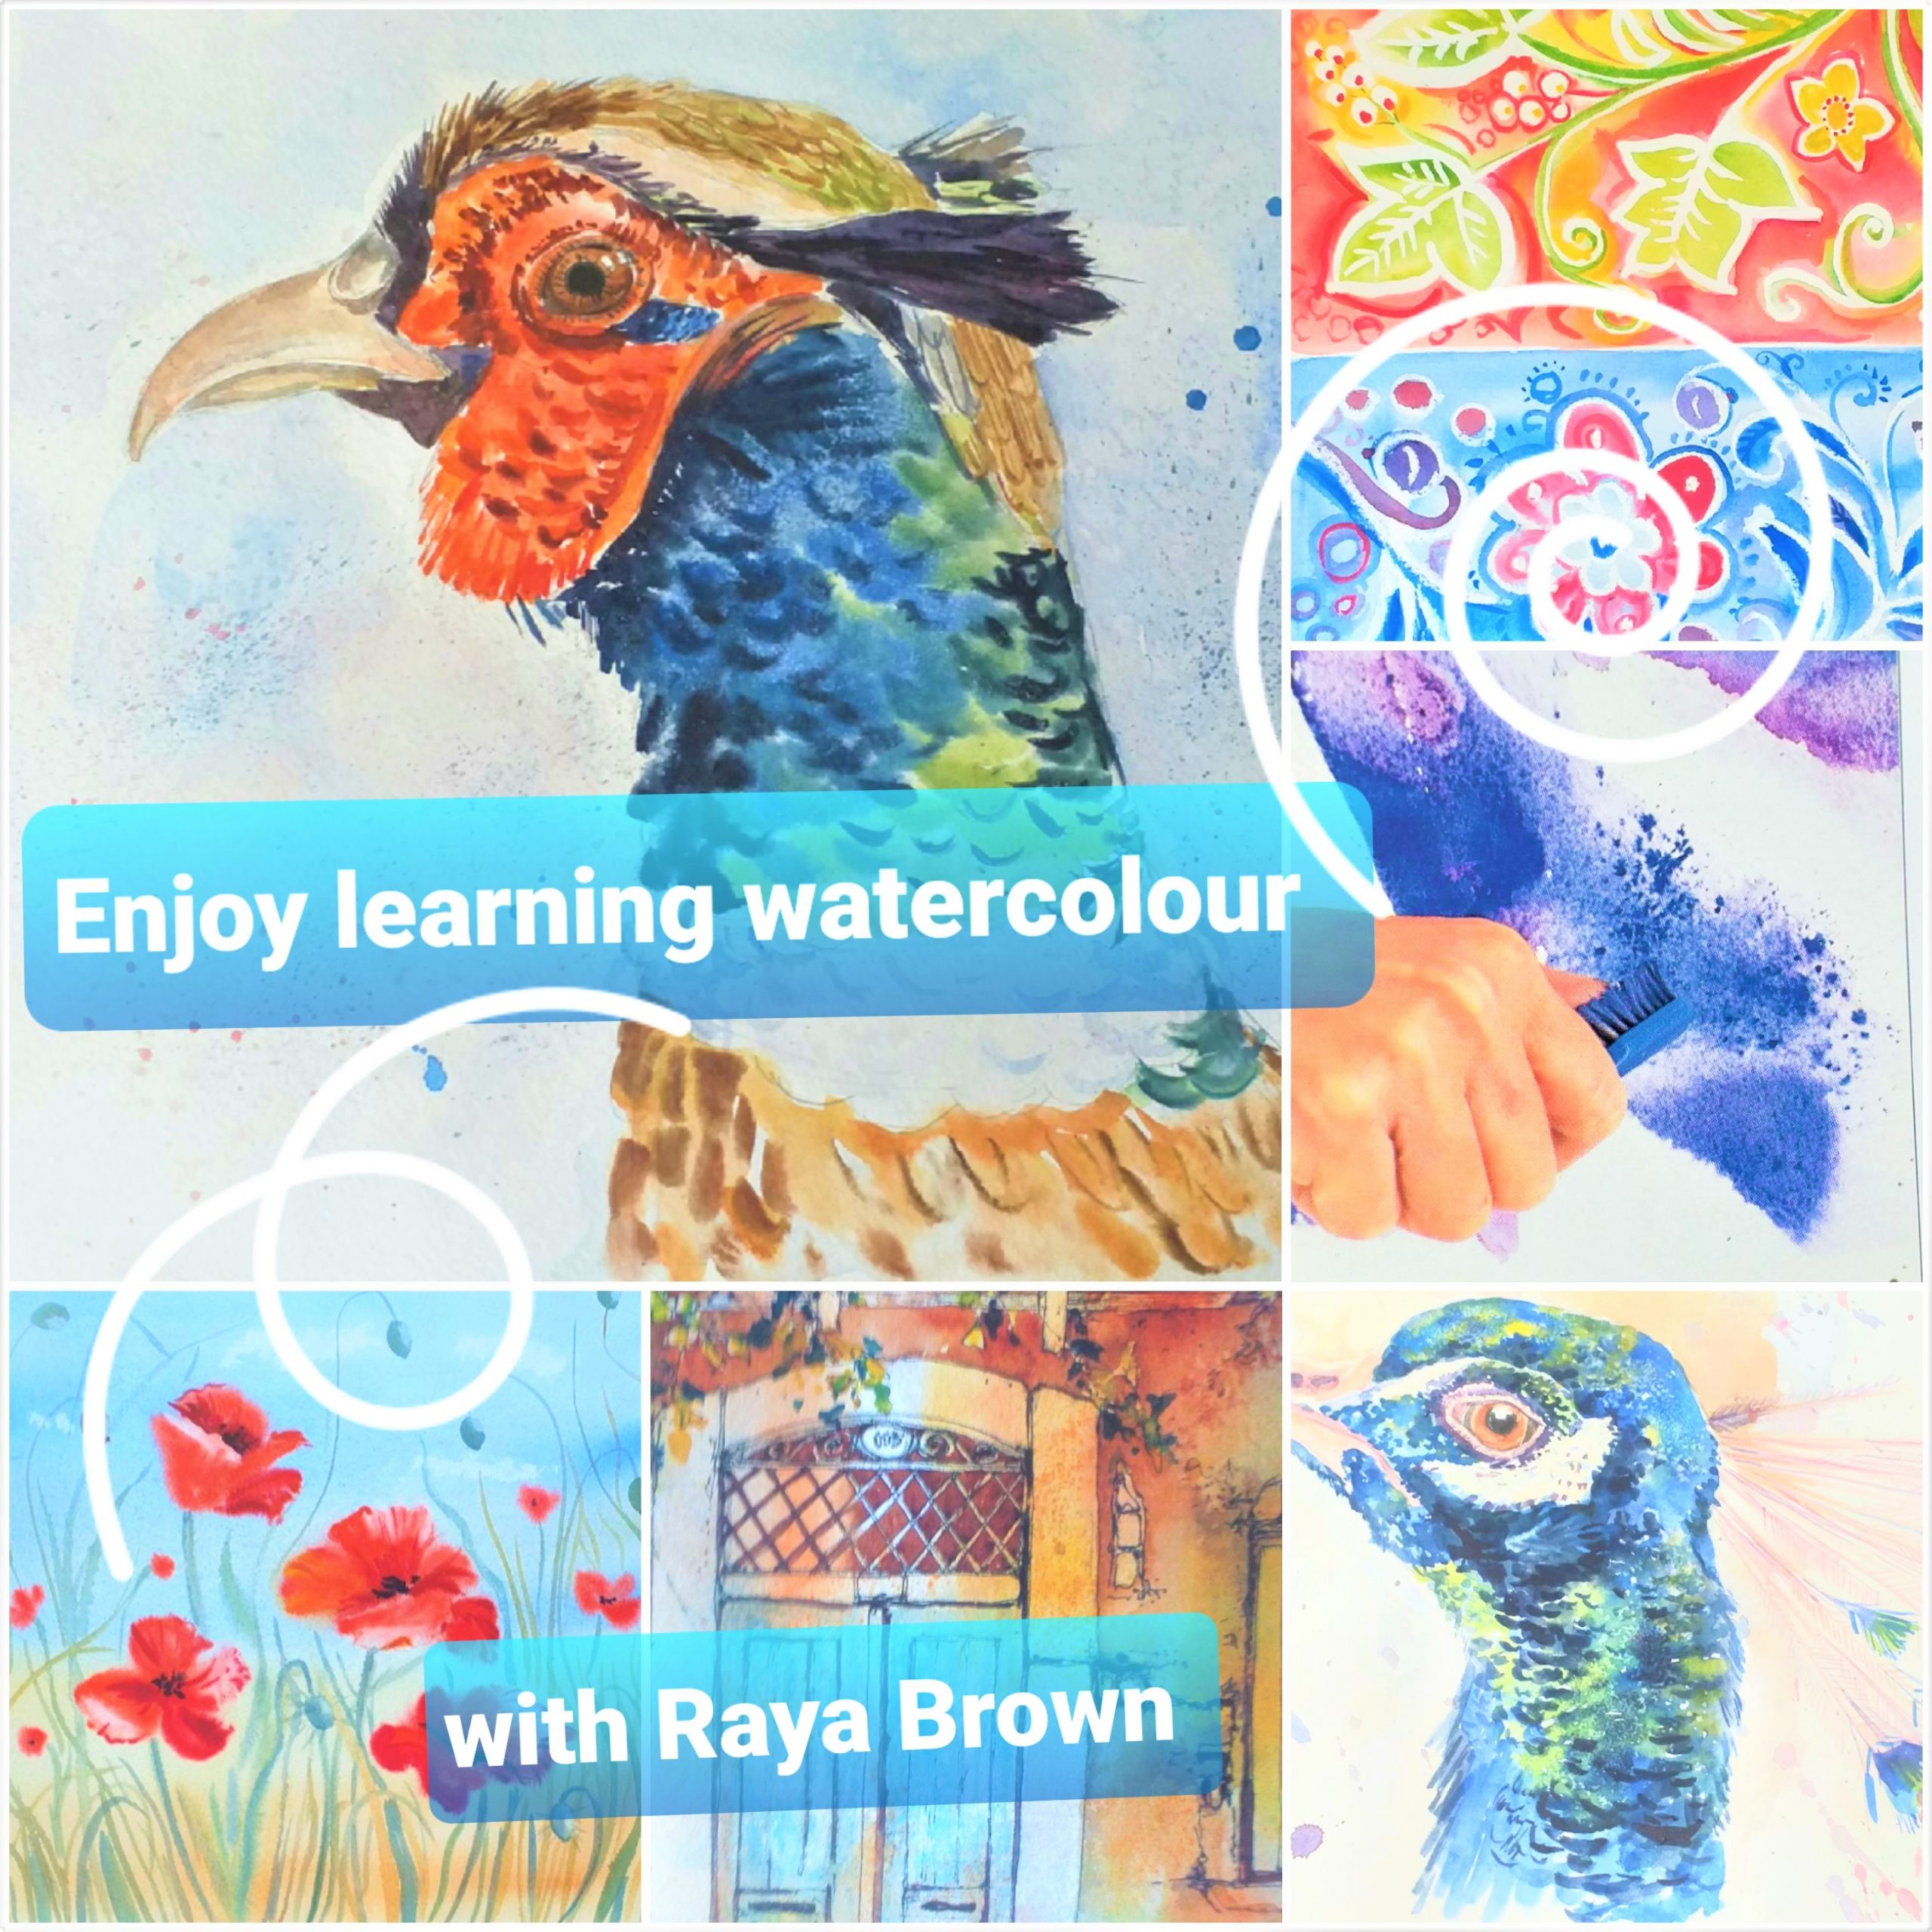 One place left on this exciting interactive online Watercolour course with live tuition